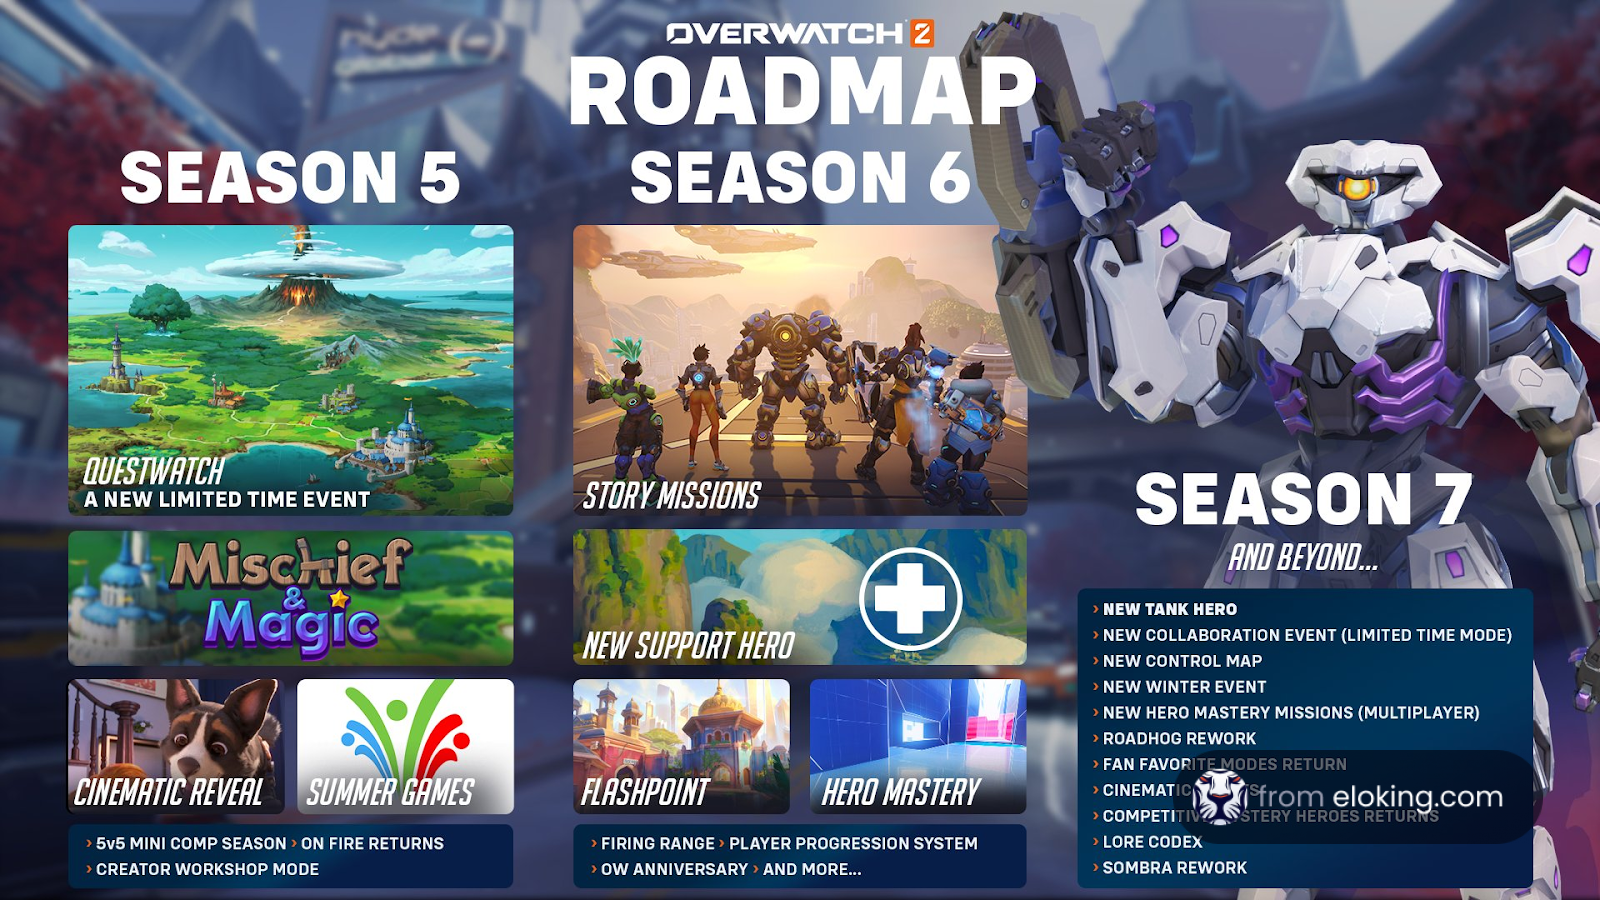 Roadmap of Overwatch 2 showing updates for Seasons 5, 6, and 7 with new events and heroes